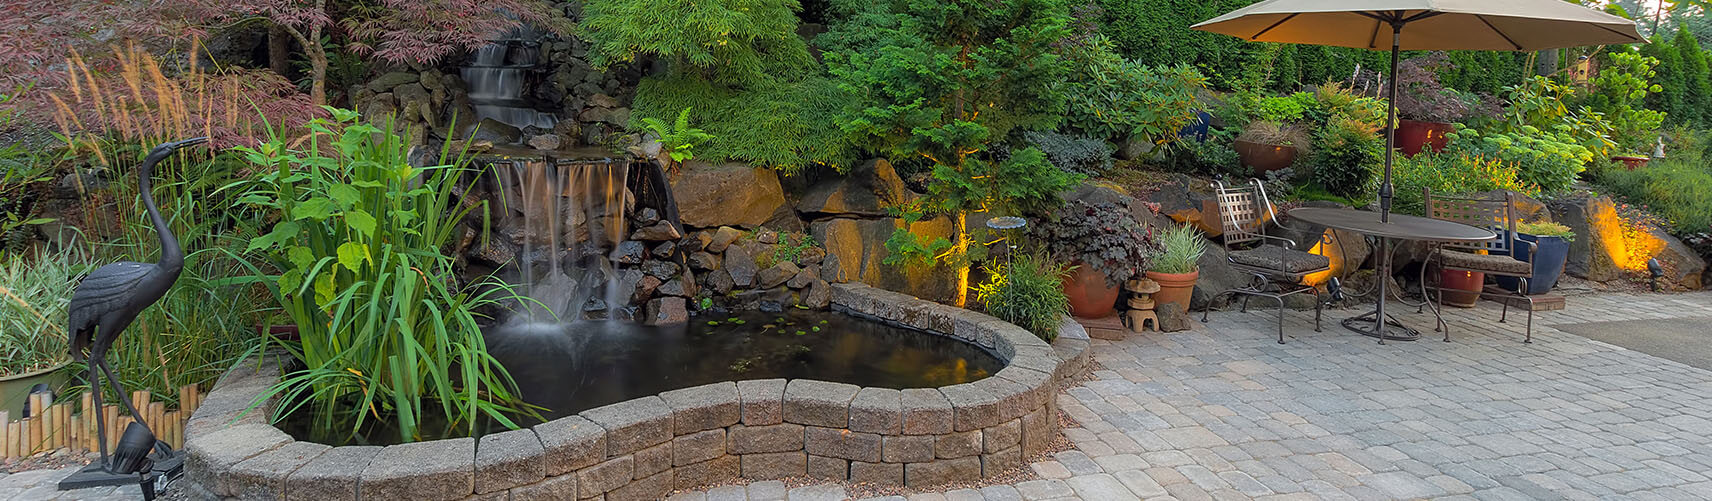 Sammamish Landscaping Company, Landscaper and Landscaping Services